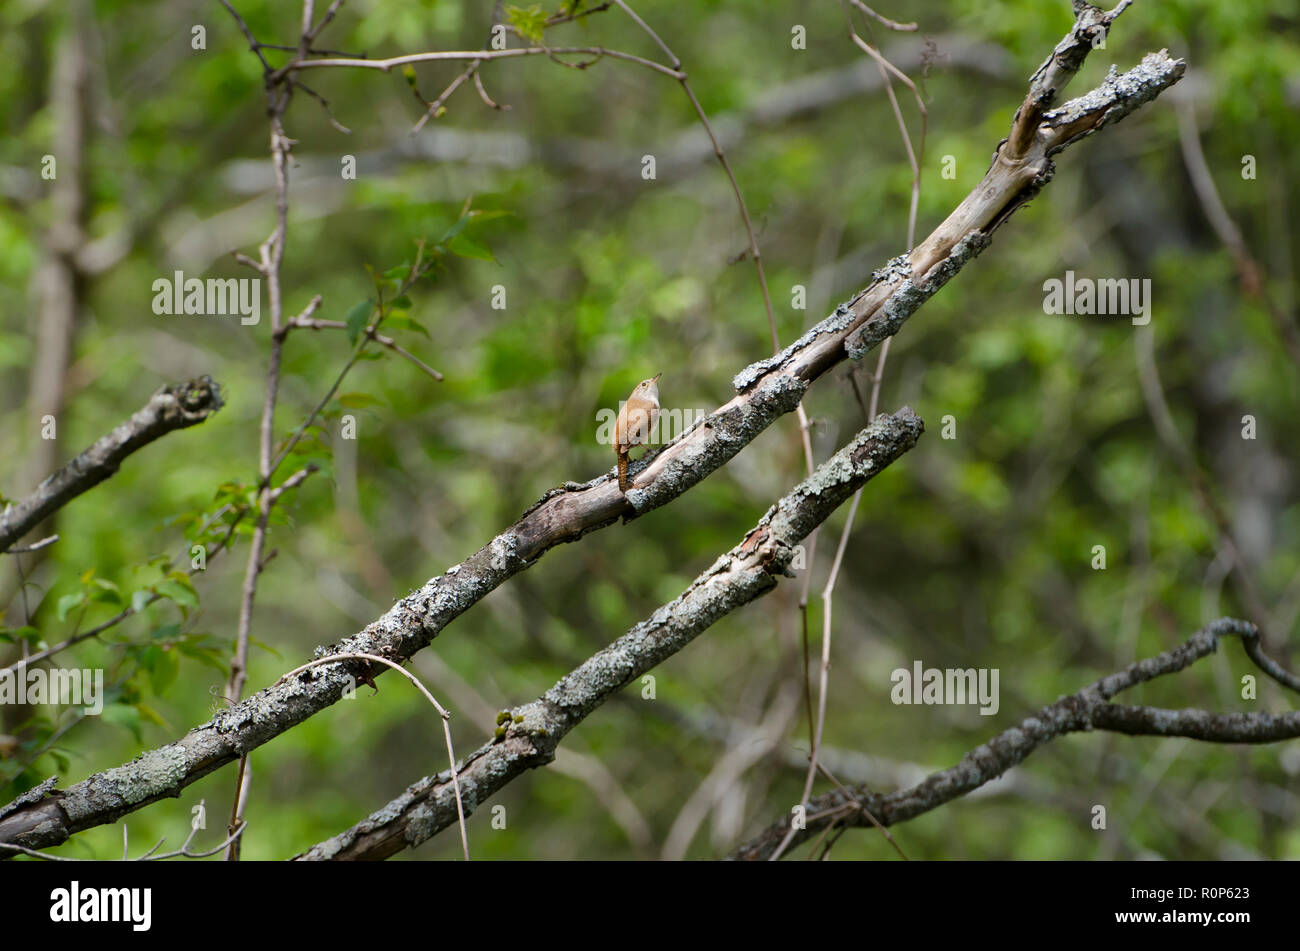 A wren bird sitting on a branch looking up Stock Photo